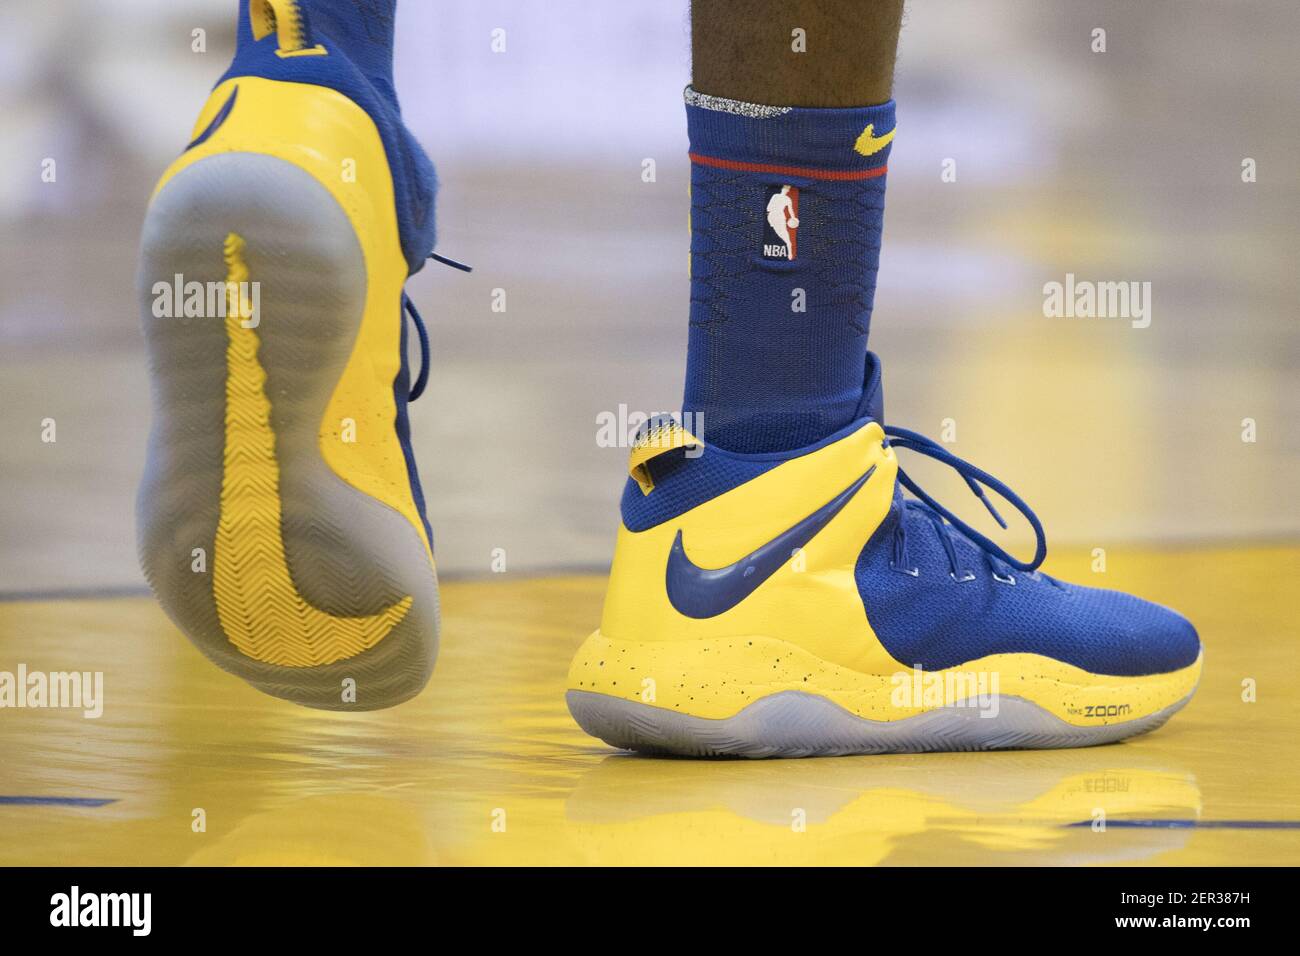 March 29, 2018; Oakland, CA, USA; Detail view of the Nike shoes worn by  Golden State Warriors forward Draymond Green (23) during the first quarter  against the Milwaukee Bucks at Oracle Arena.